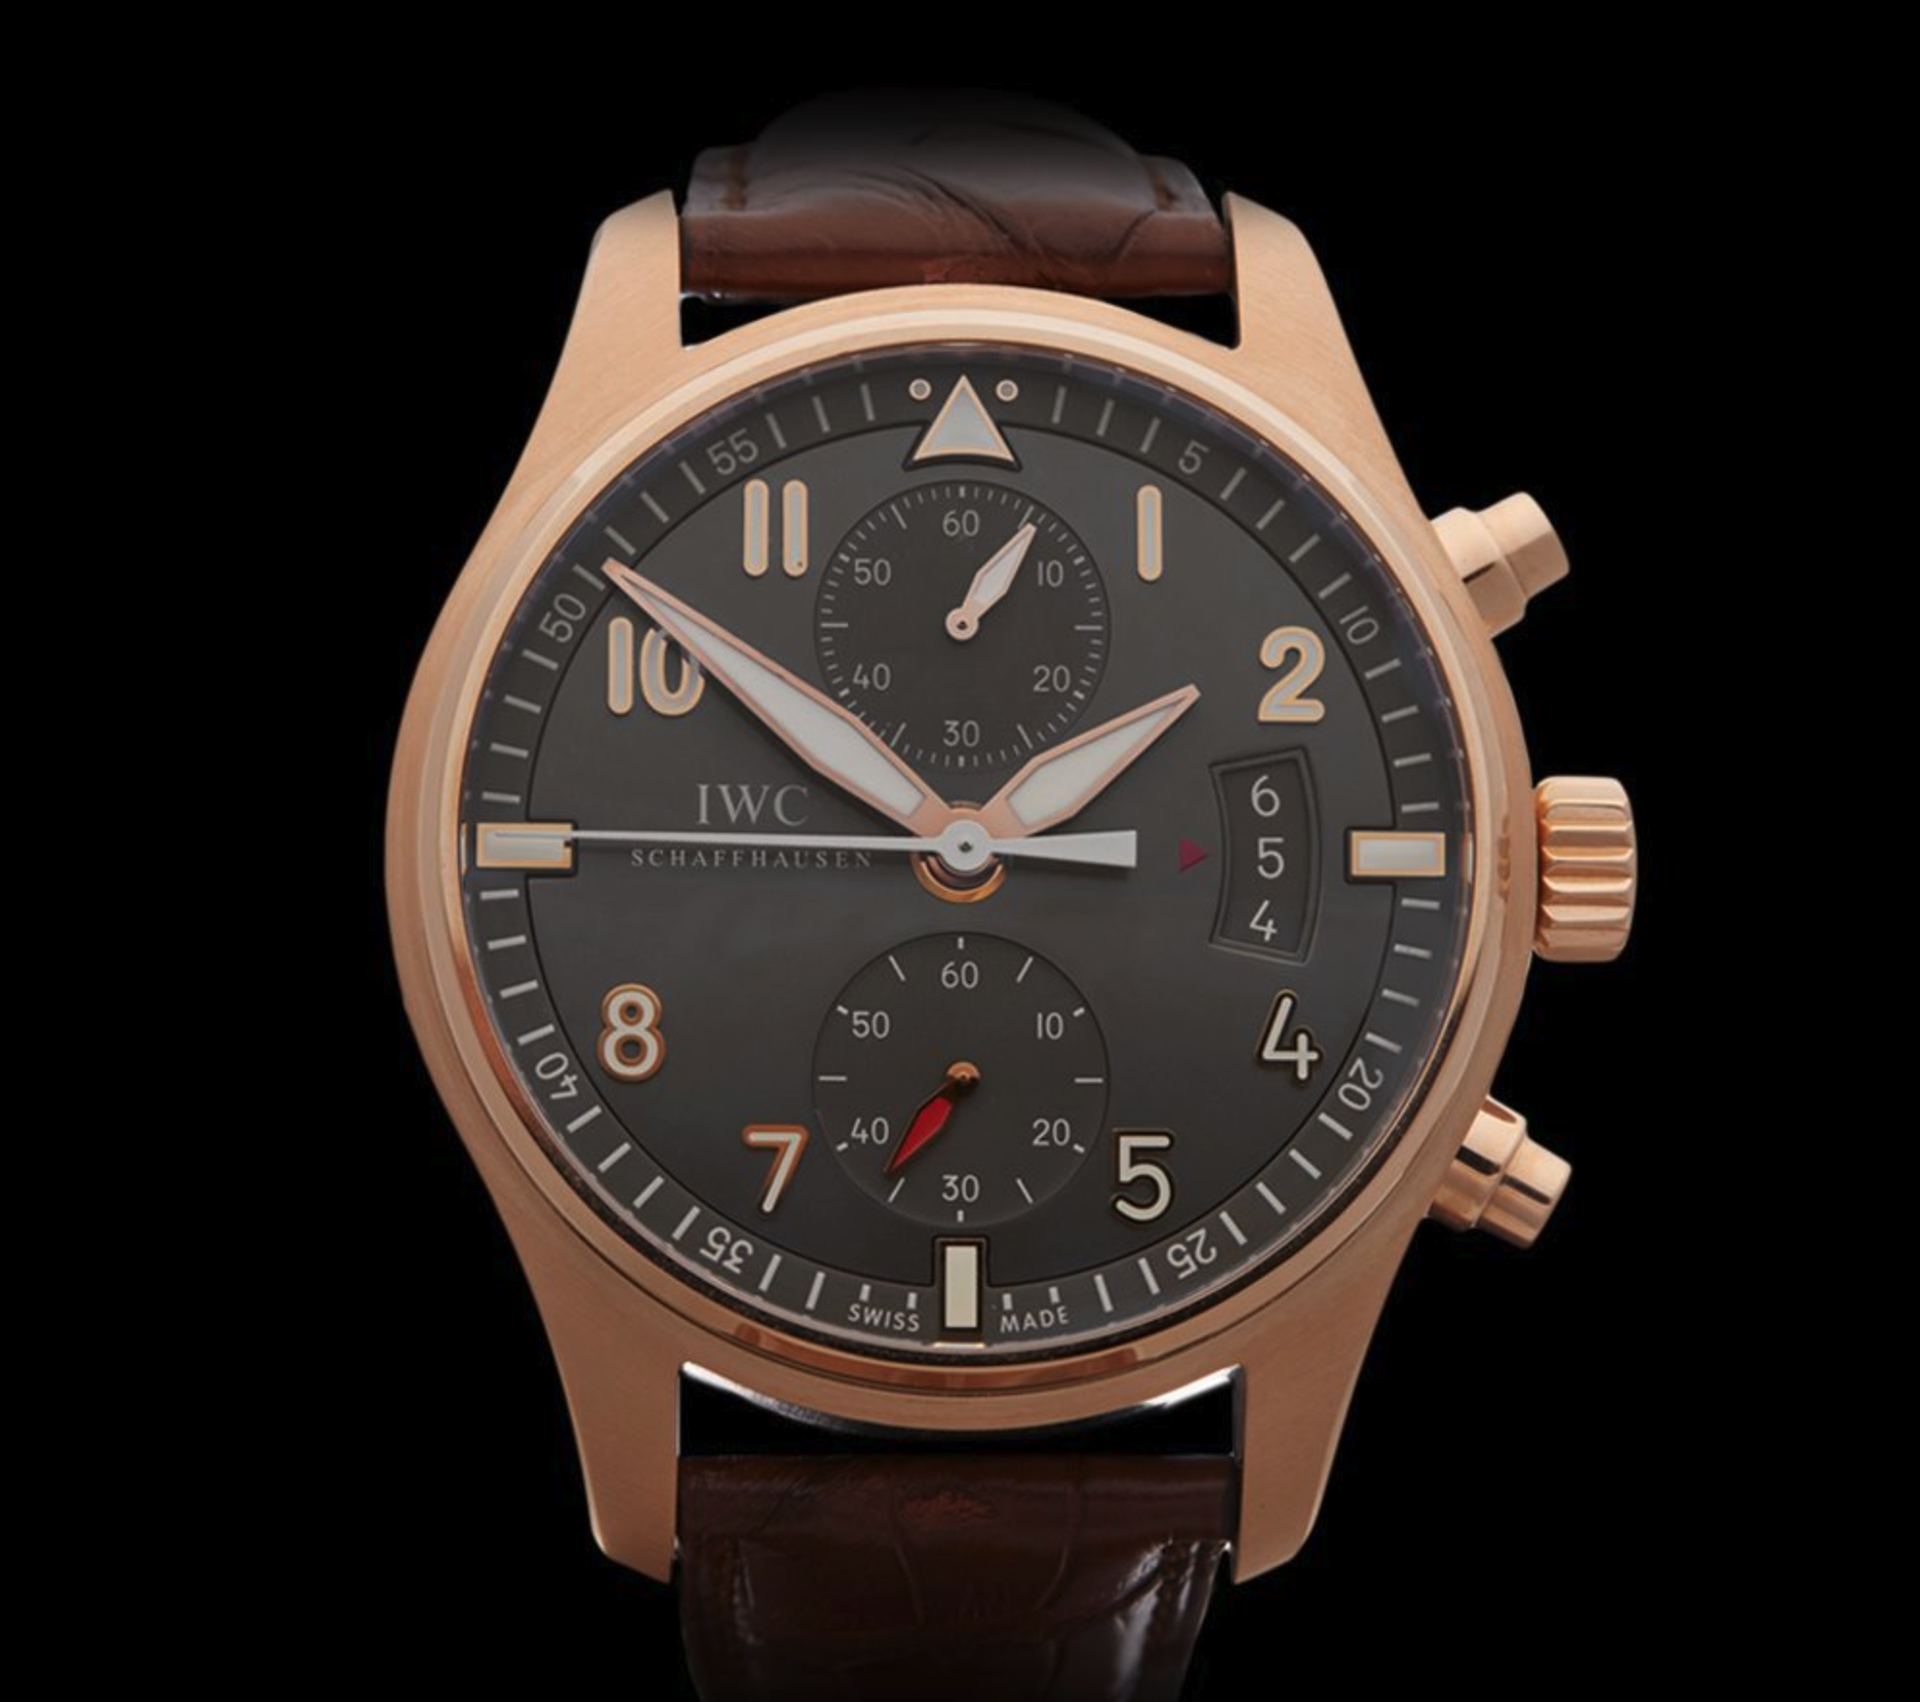 IWC Pilot's Chronograph Spitfire 43mm 18k Rose Gold IW387803 - Image 9 of 9